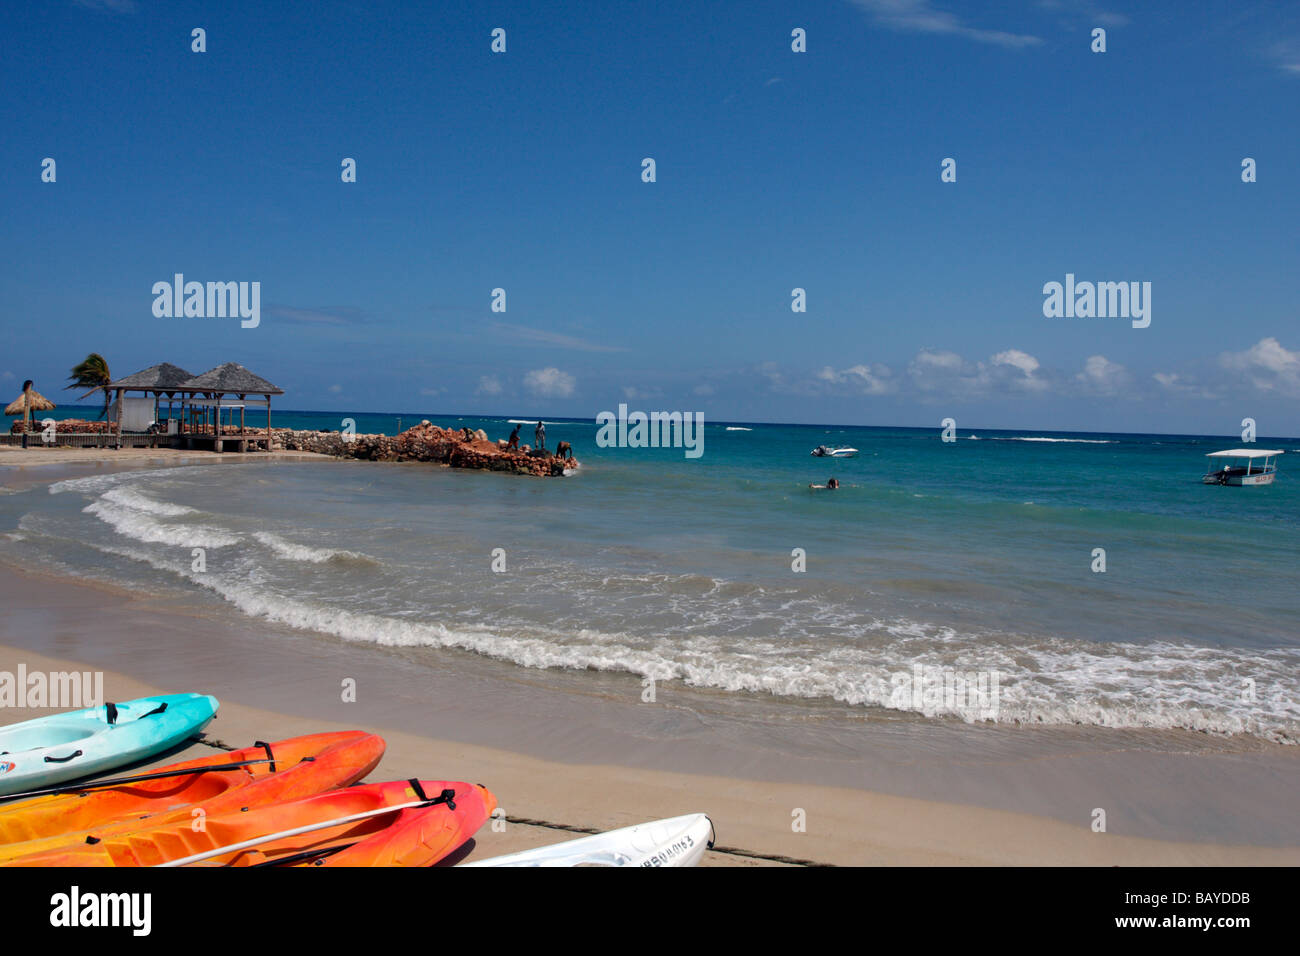 Beach and jetty break at Royal Decameron resort in Runaway Bay, Jamaica. In the background one can see workers on jetty. Stock Photo